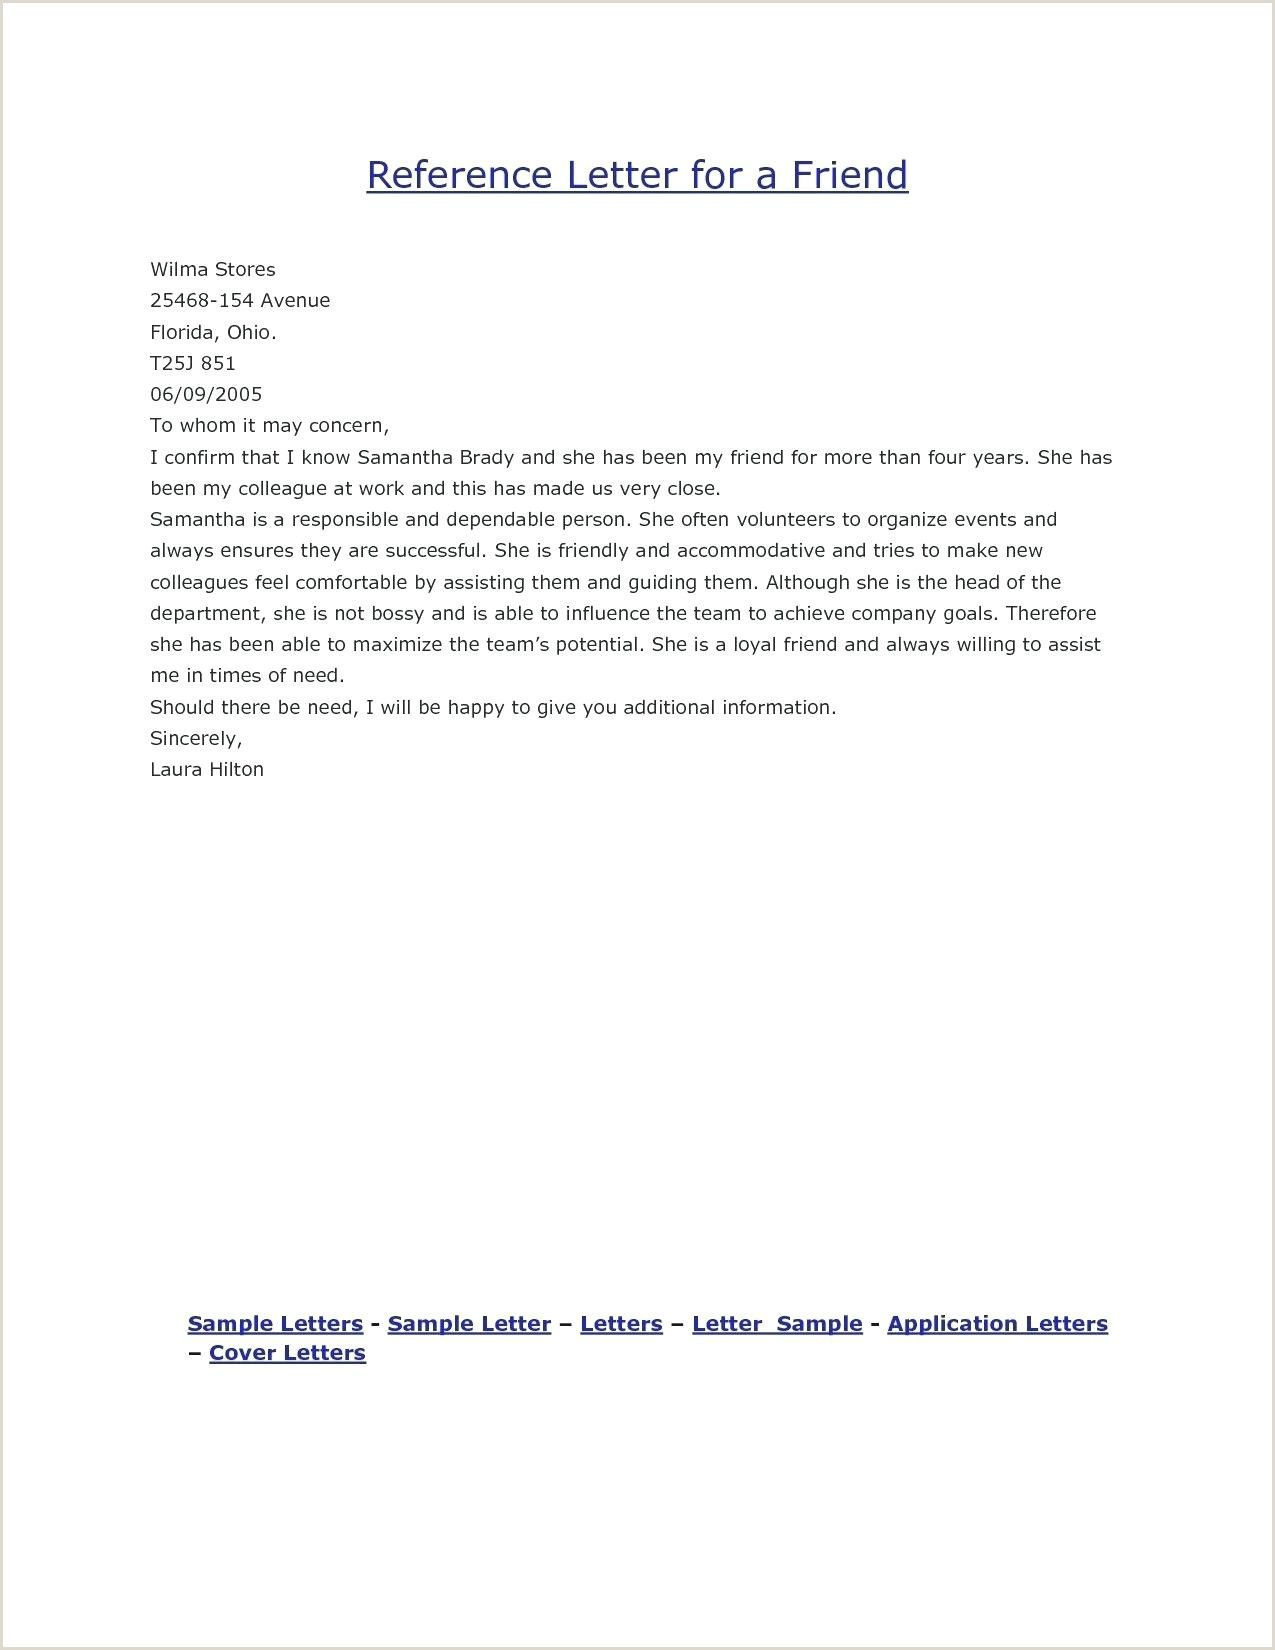 Request Letter For Good Moral Good Morals Writing A inside measurements 1275 X 1650